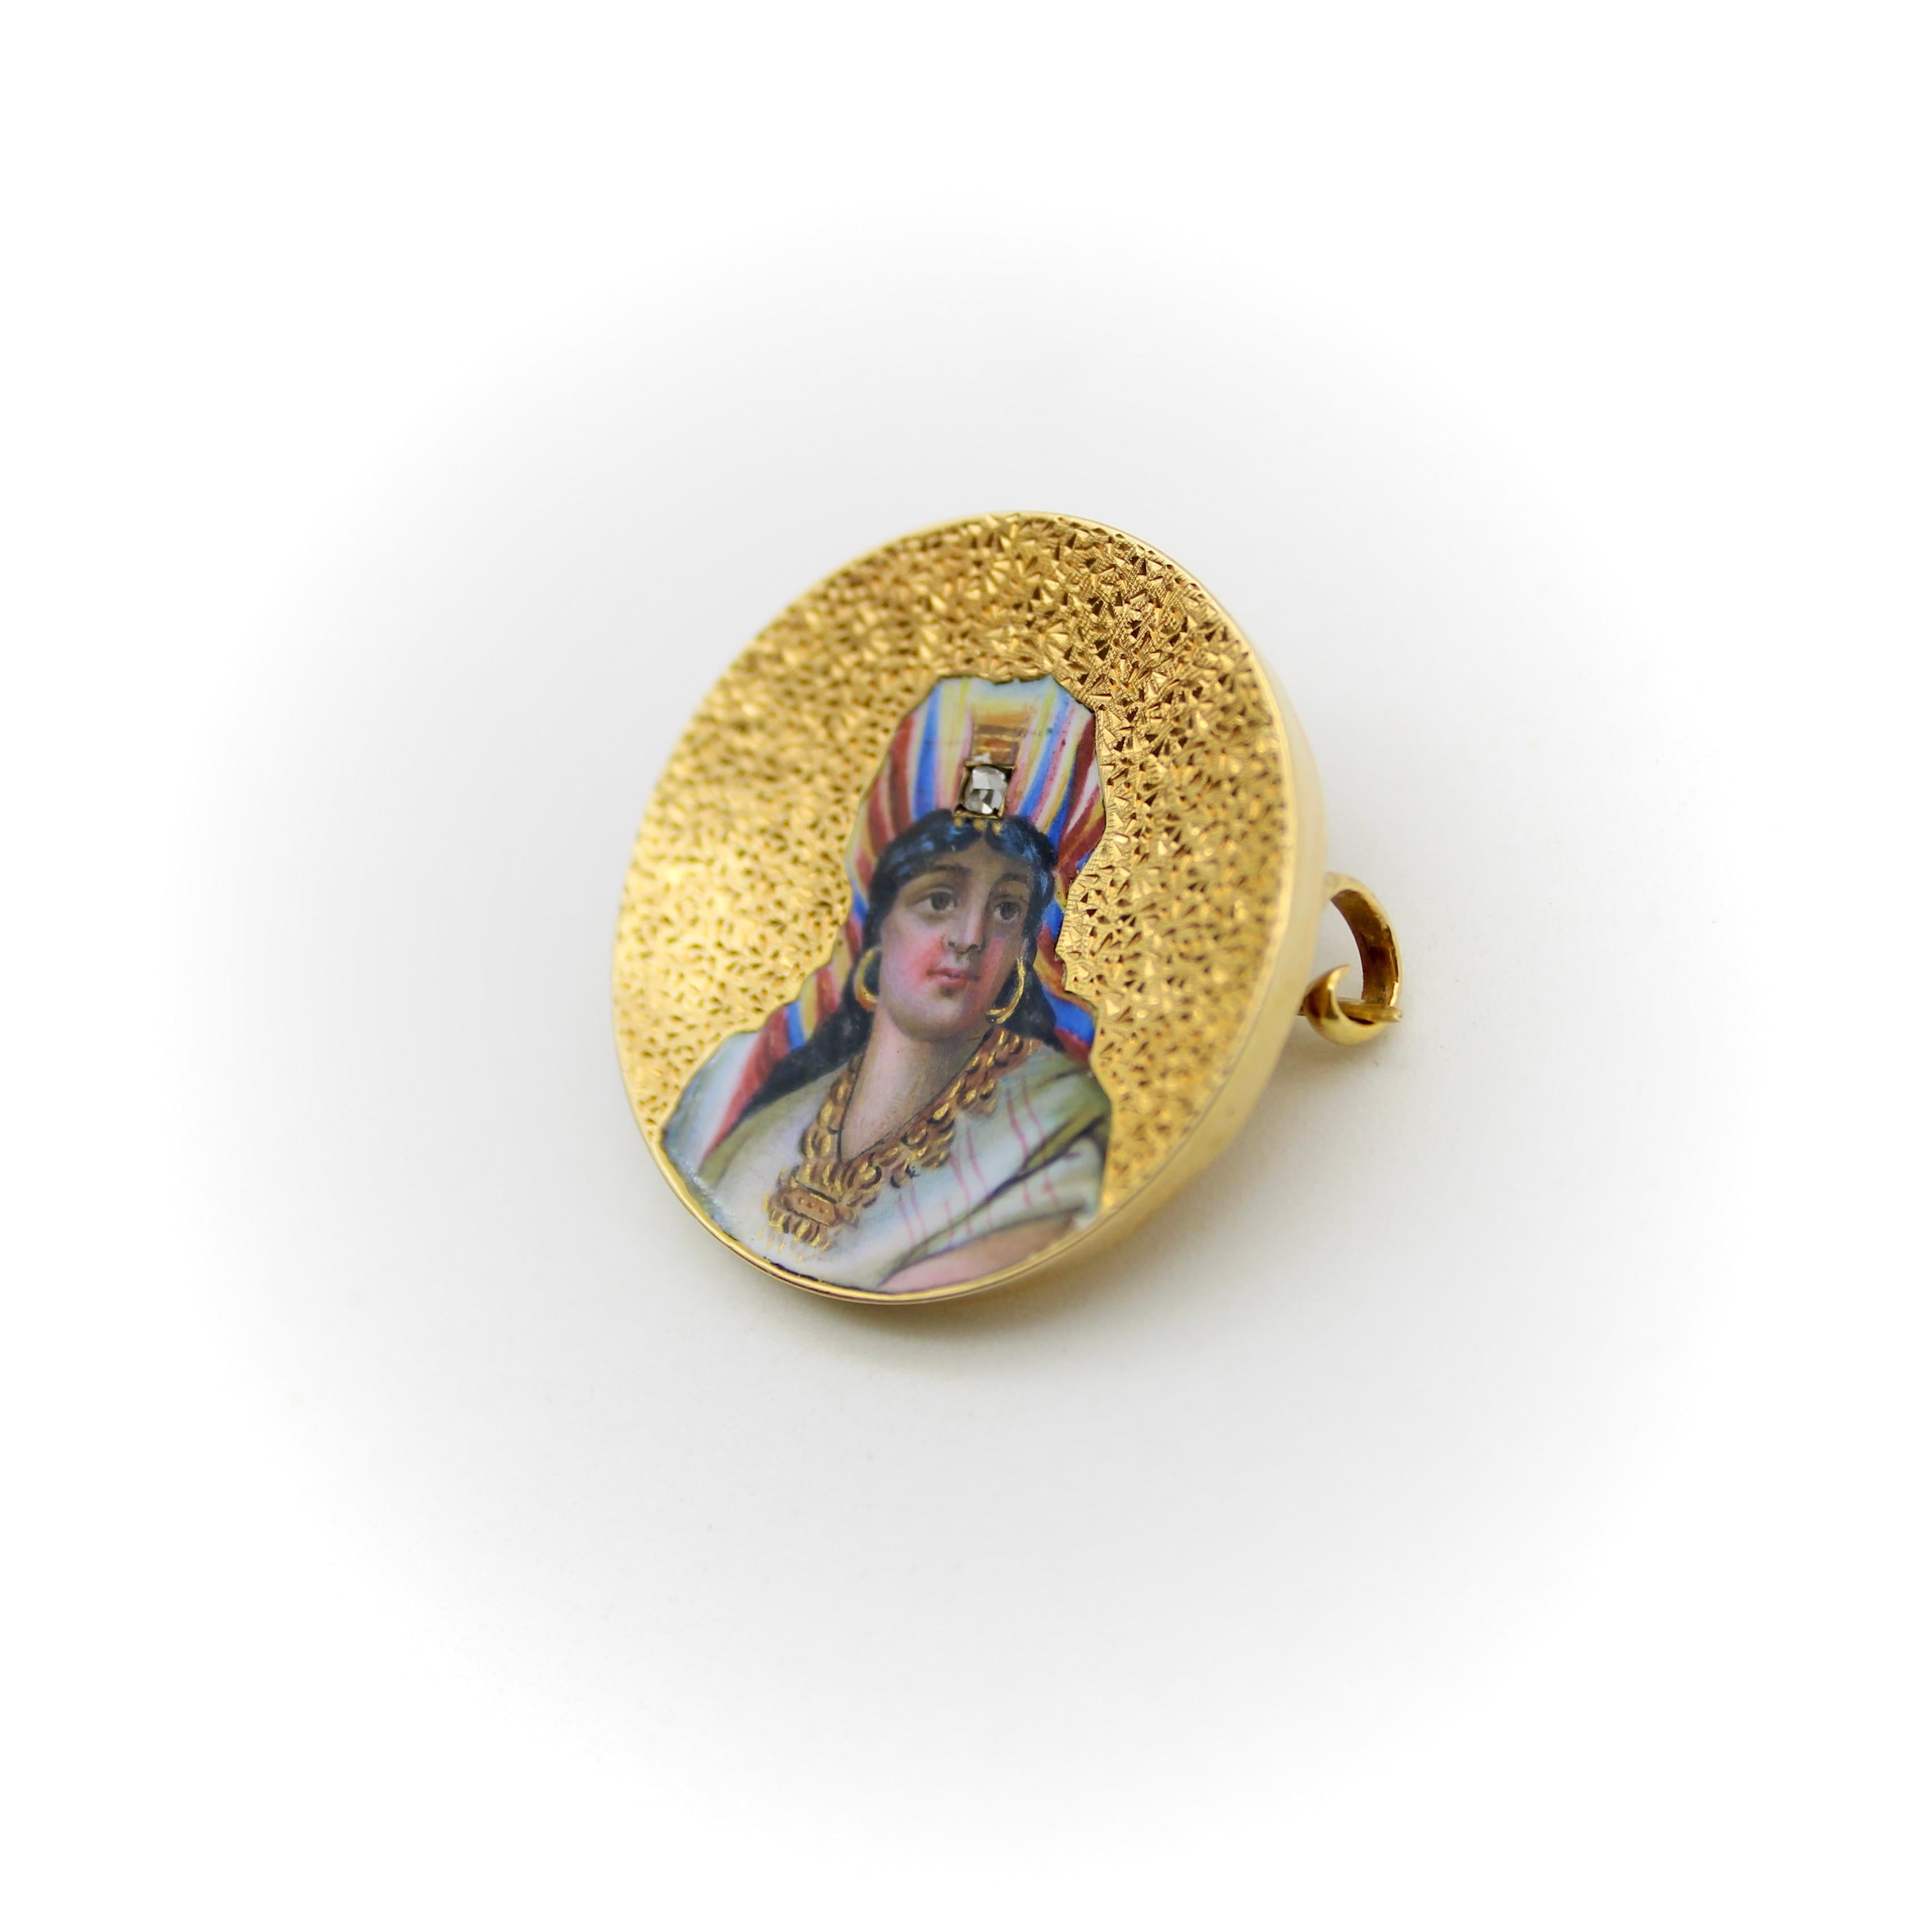 This far-east style pin is hand painted with stunning detail in enamel. The woman pictured on the front wears golden jewelry and colorful robes. Her expression is confident and calm, she inspires a sense of dignity when worn. The painting is so